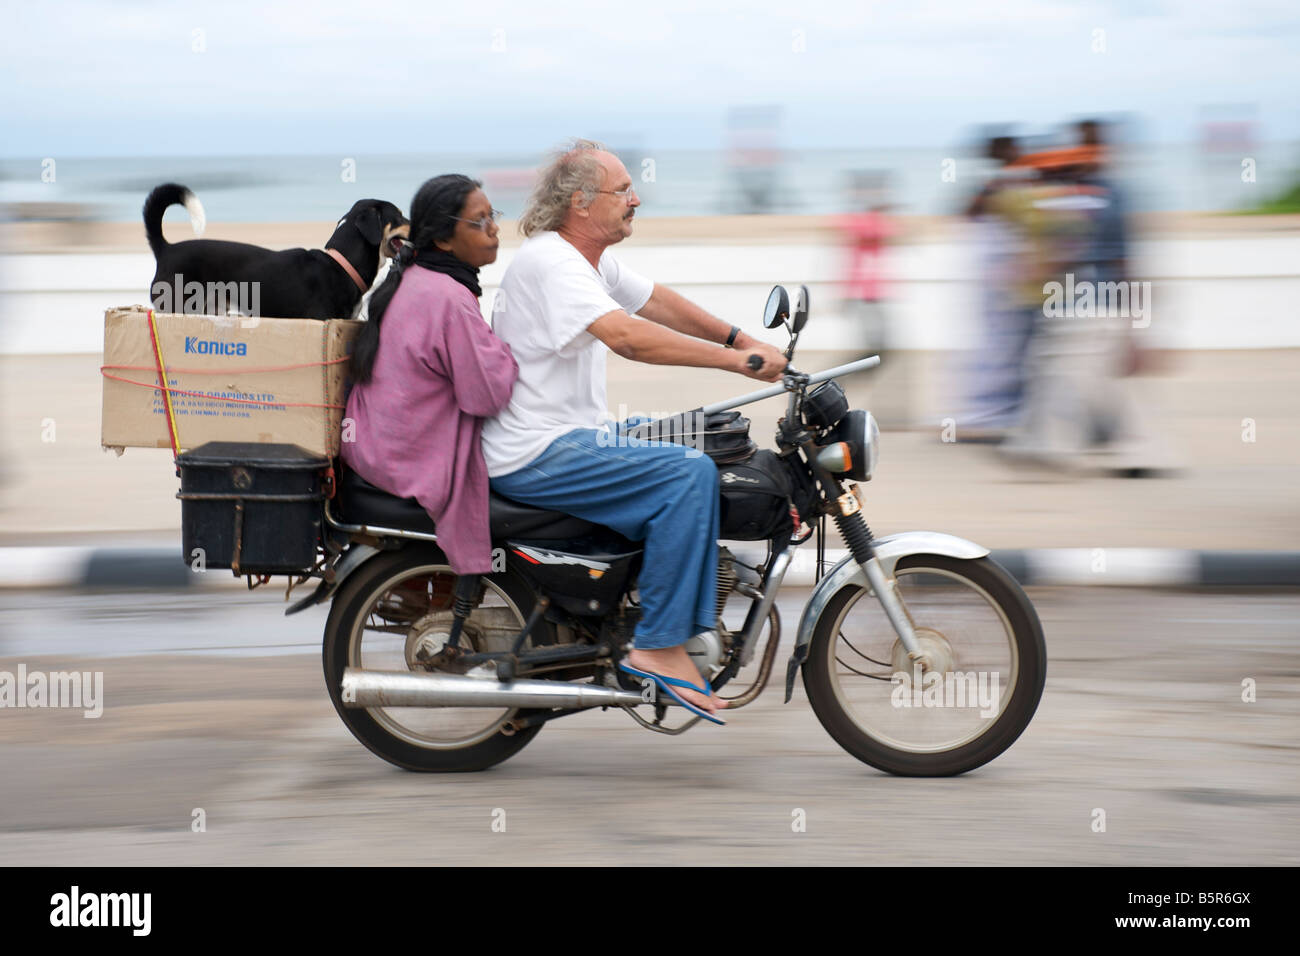 Motorcyclist and passengers on the Pondicherry waterfront in India. Stock Photo